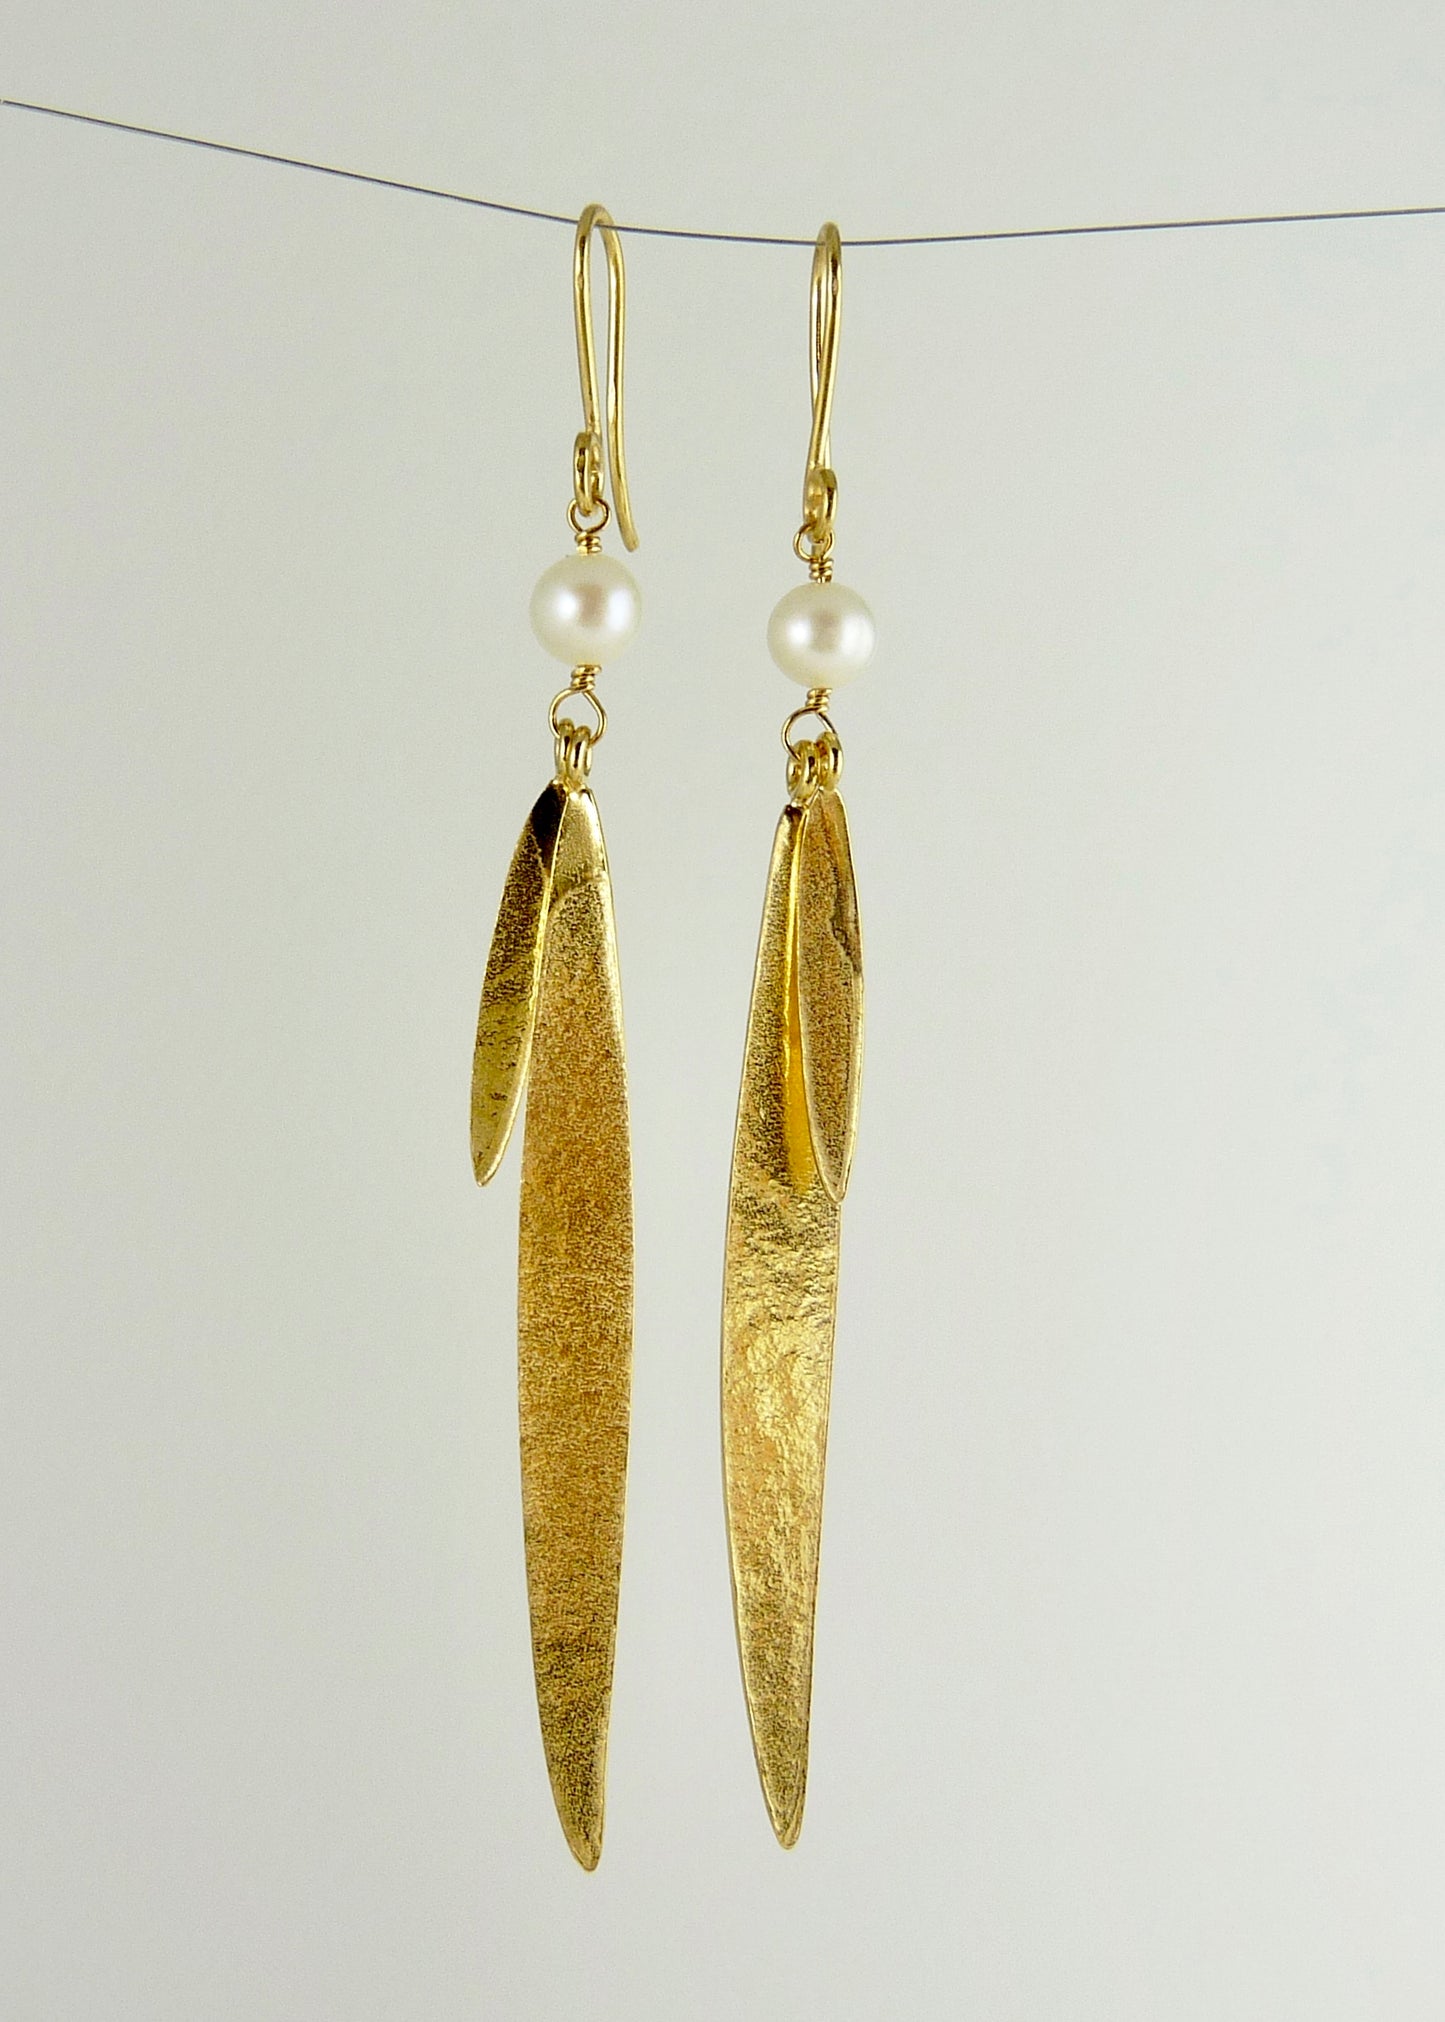 Lily Long Double Leaf Earrings with Fresh Water Pearls